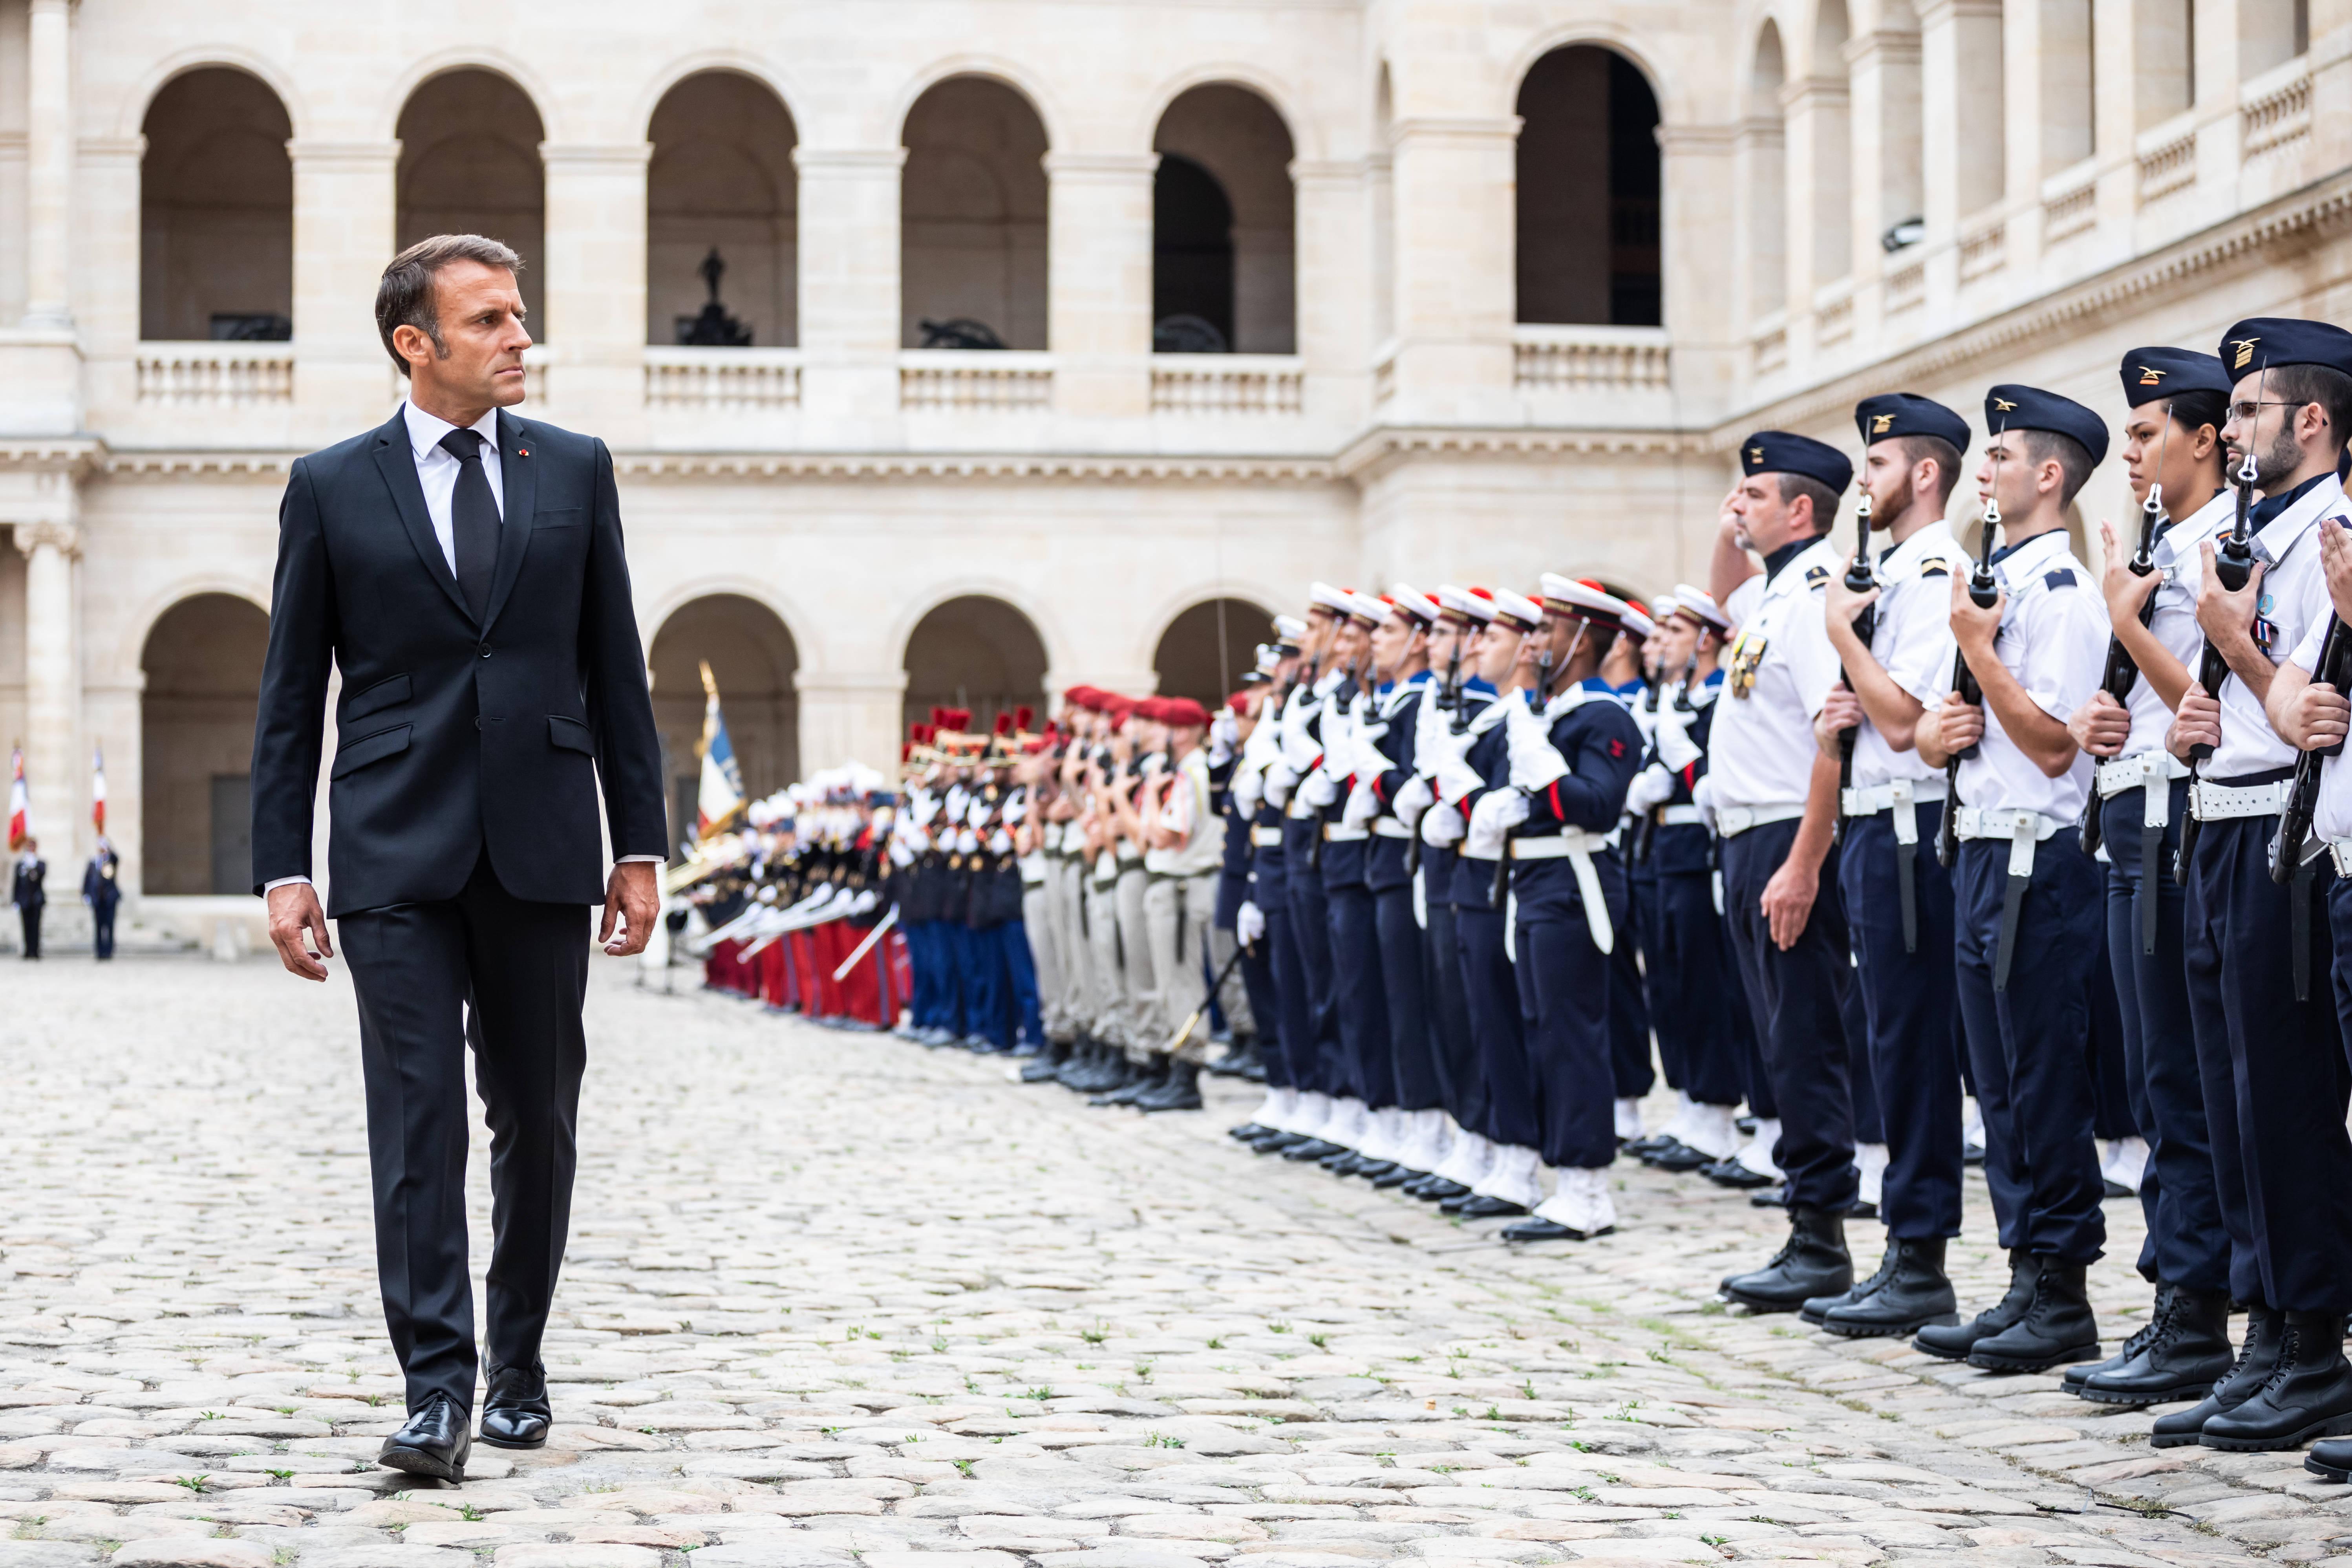 Macron: If Russia breaches, we may deploy our troops